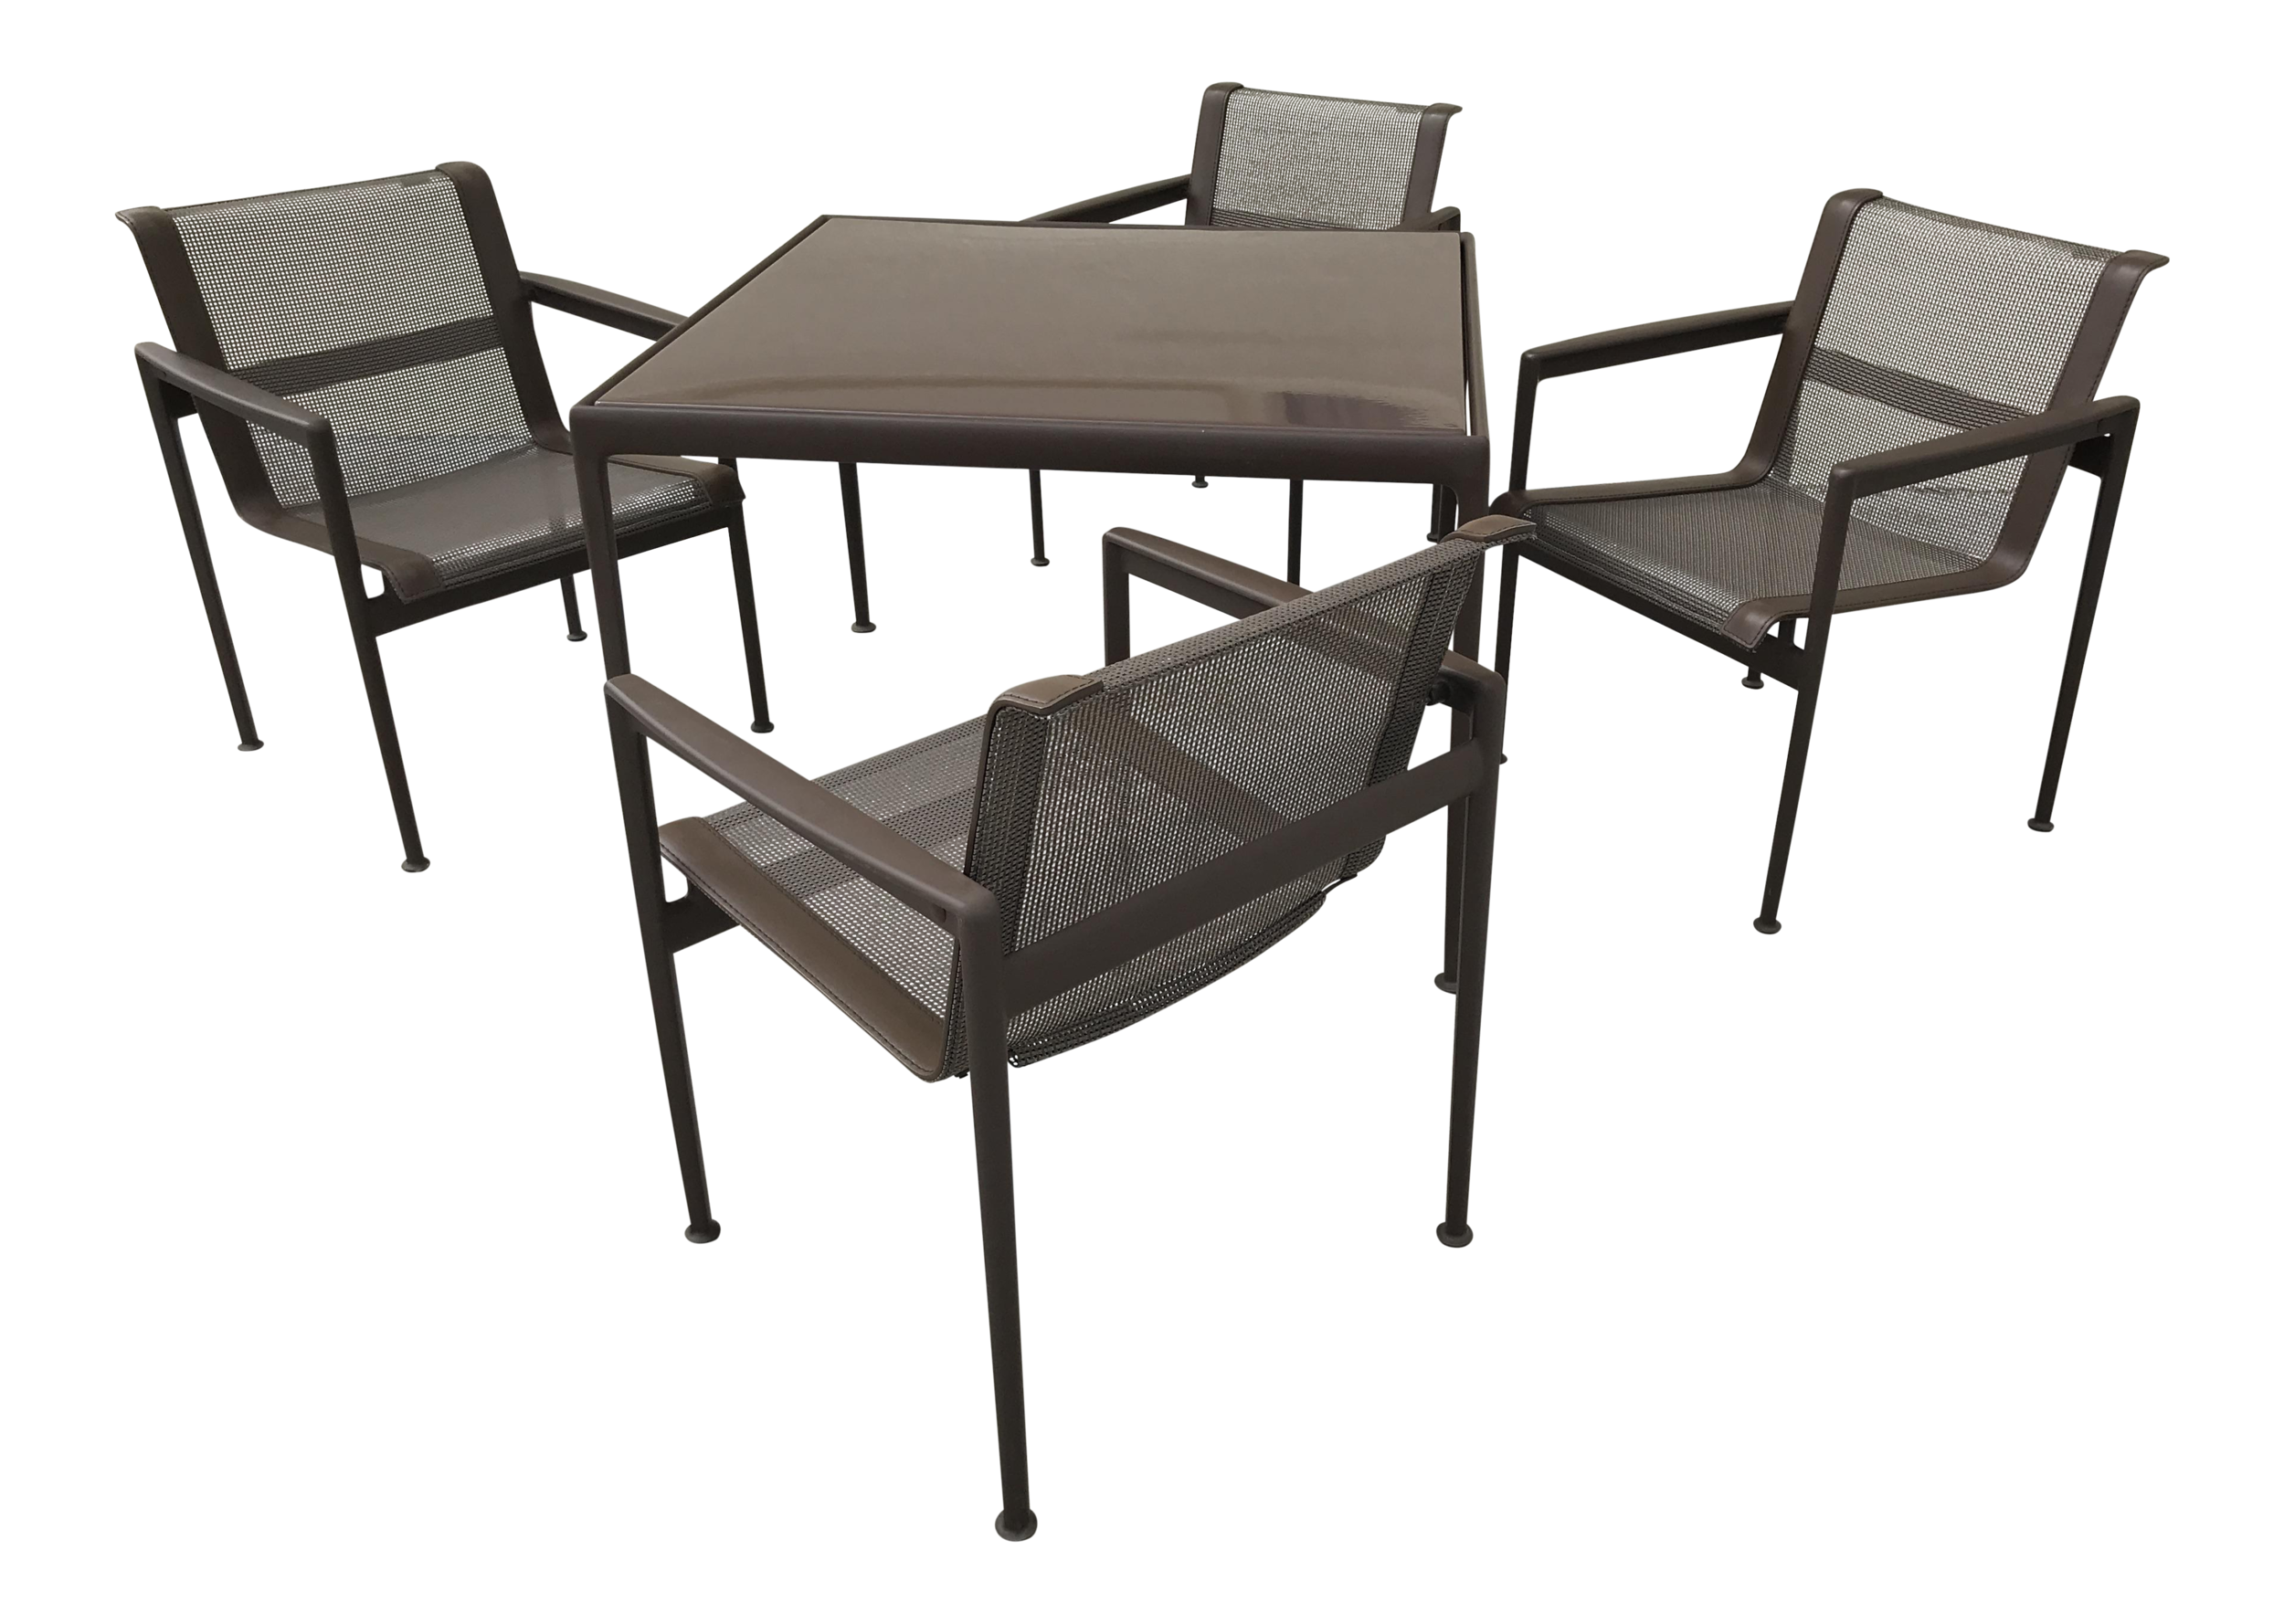 richard-schultz-1966-aluminum-dining-table-with-chairs-dining-set-2543.png